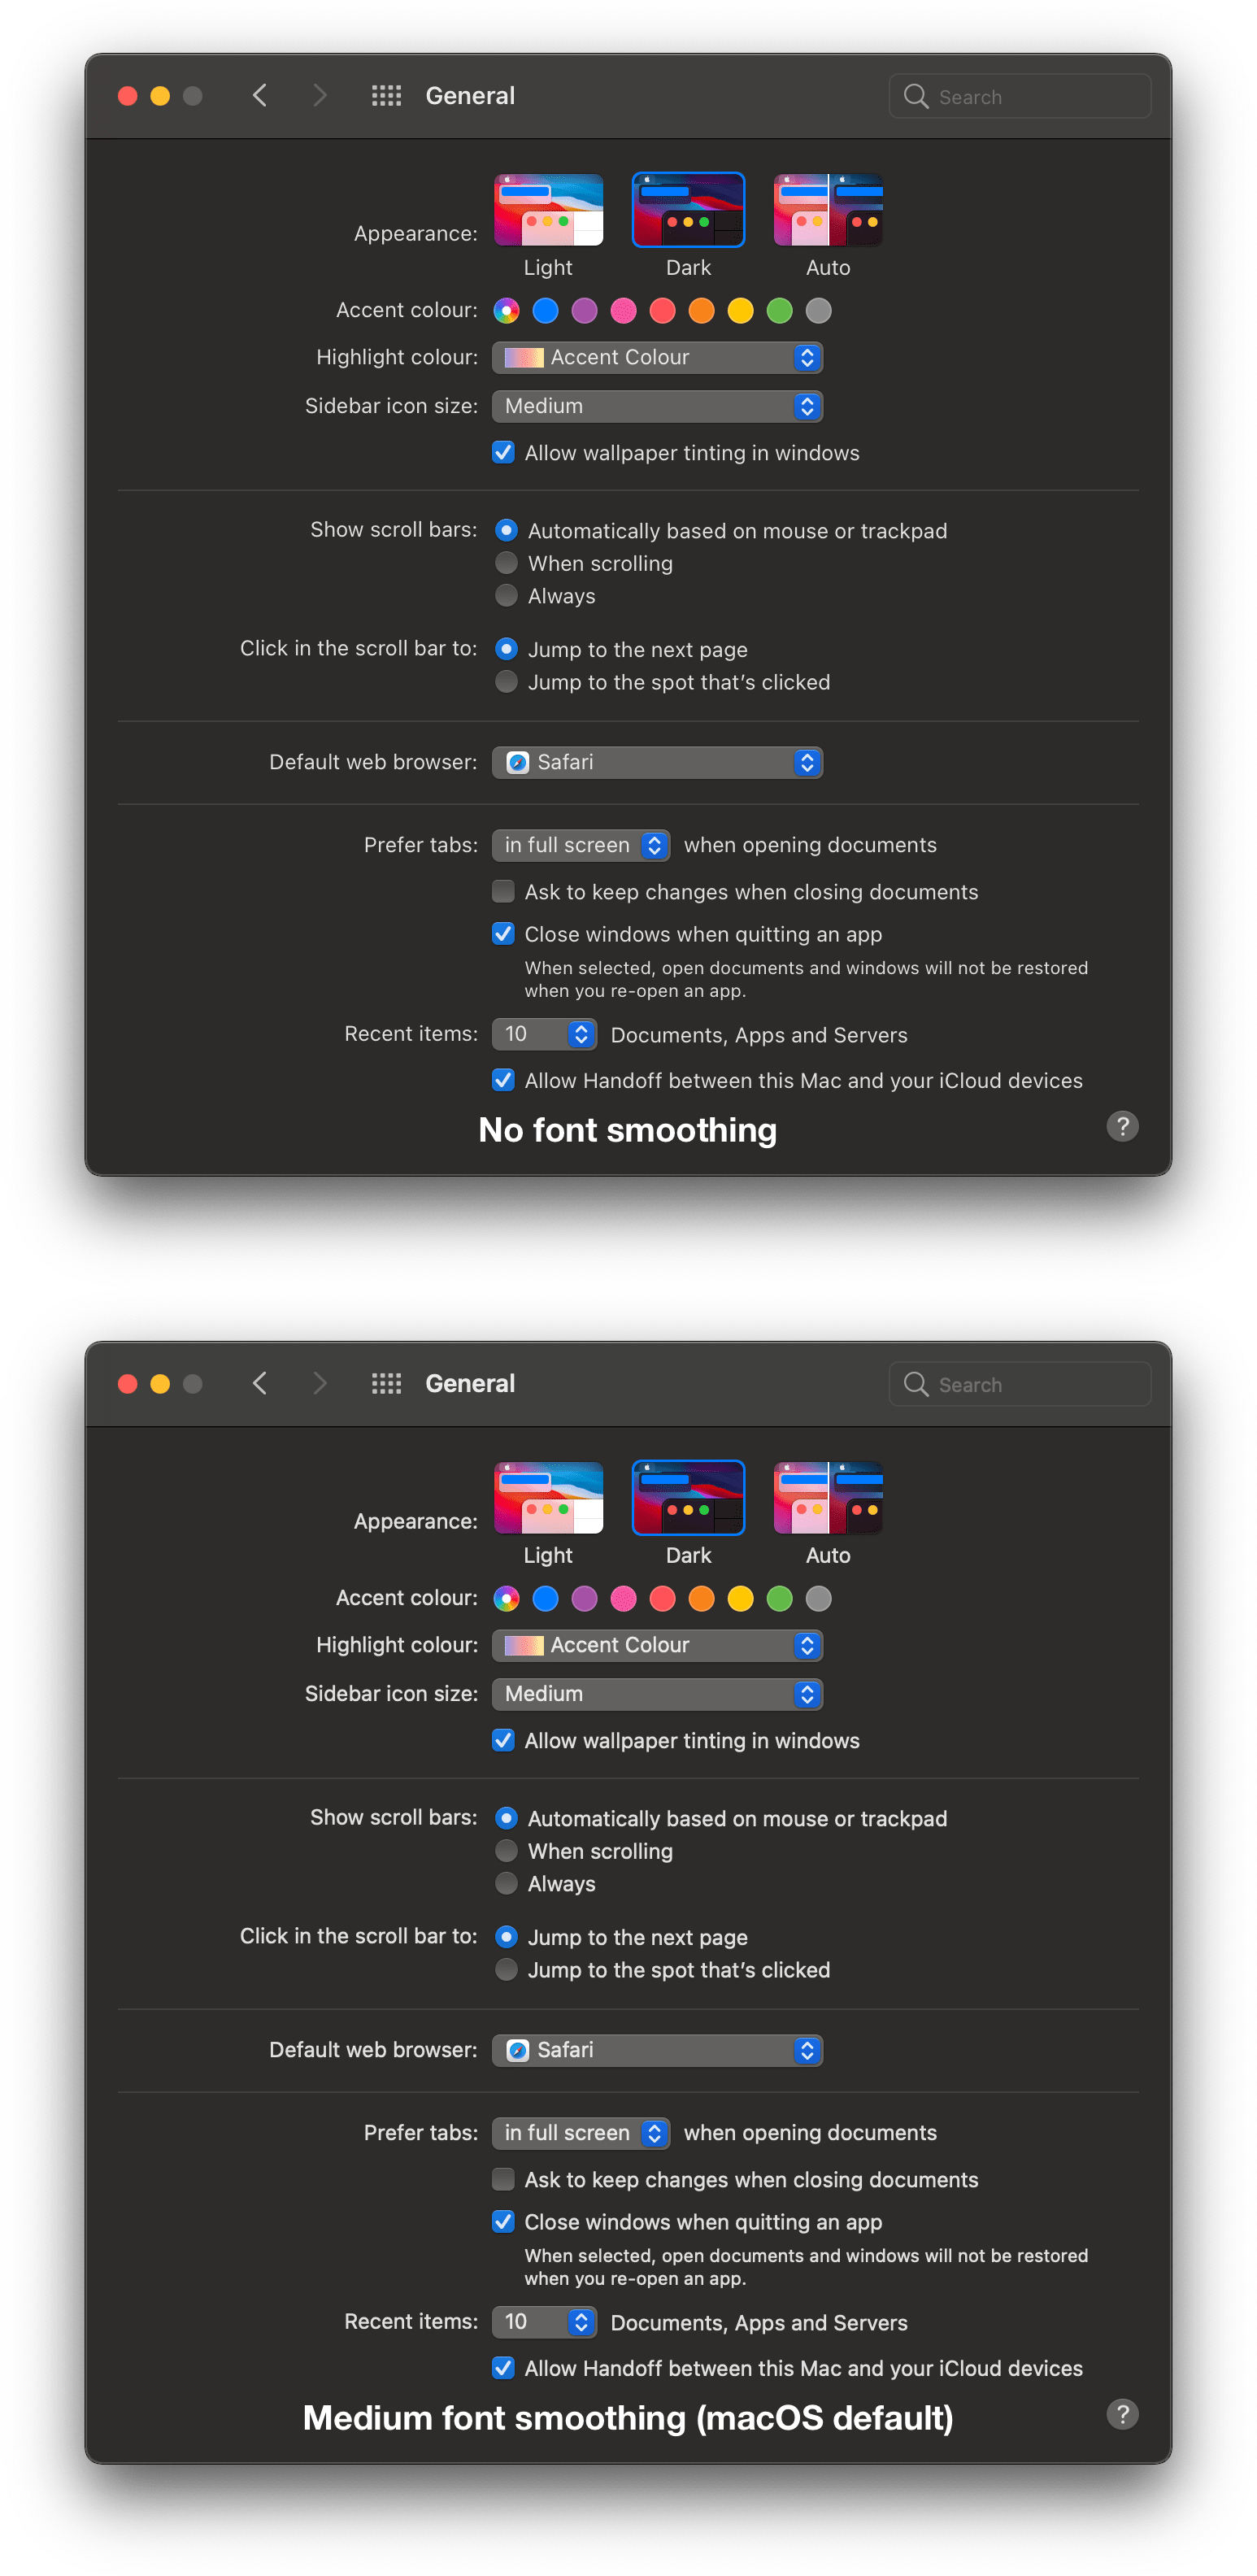 Hover over or click the image to see the difference between medium font smoothing (macOS default) and no font smoothing.